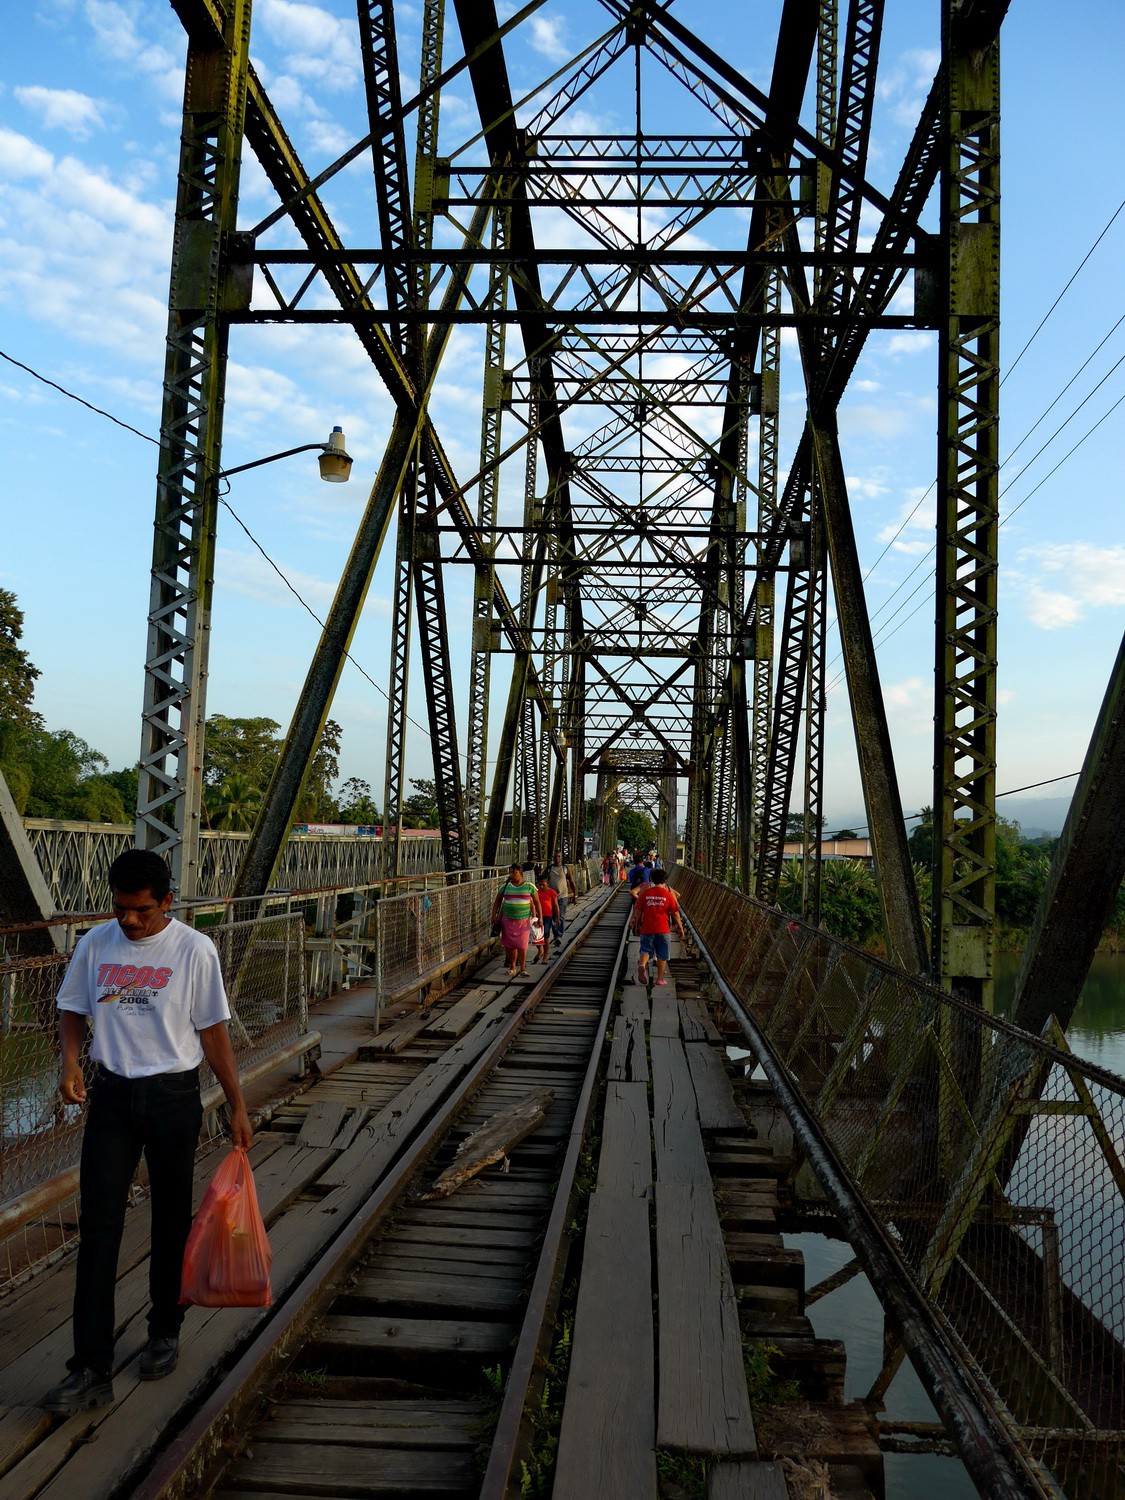 The old railway bridge on the border between Costa Rica and Panama (Caribbean Side in Sixaola) which is now used by pedestrians - Look at the nice wholes